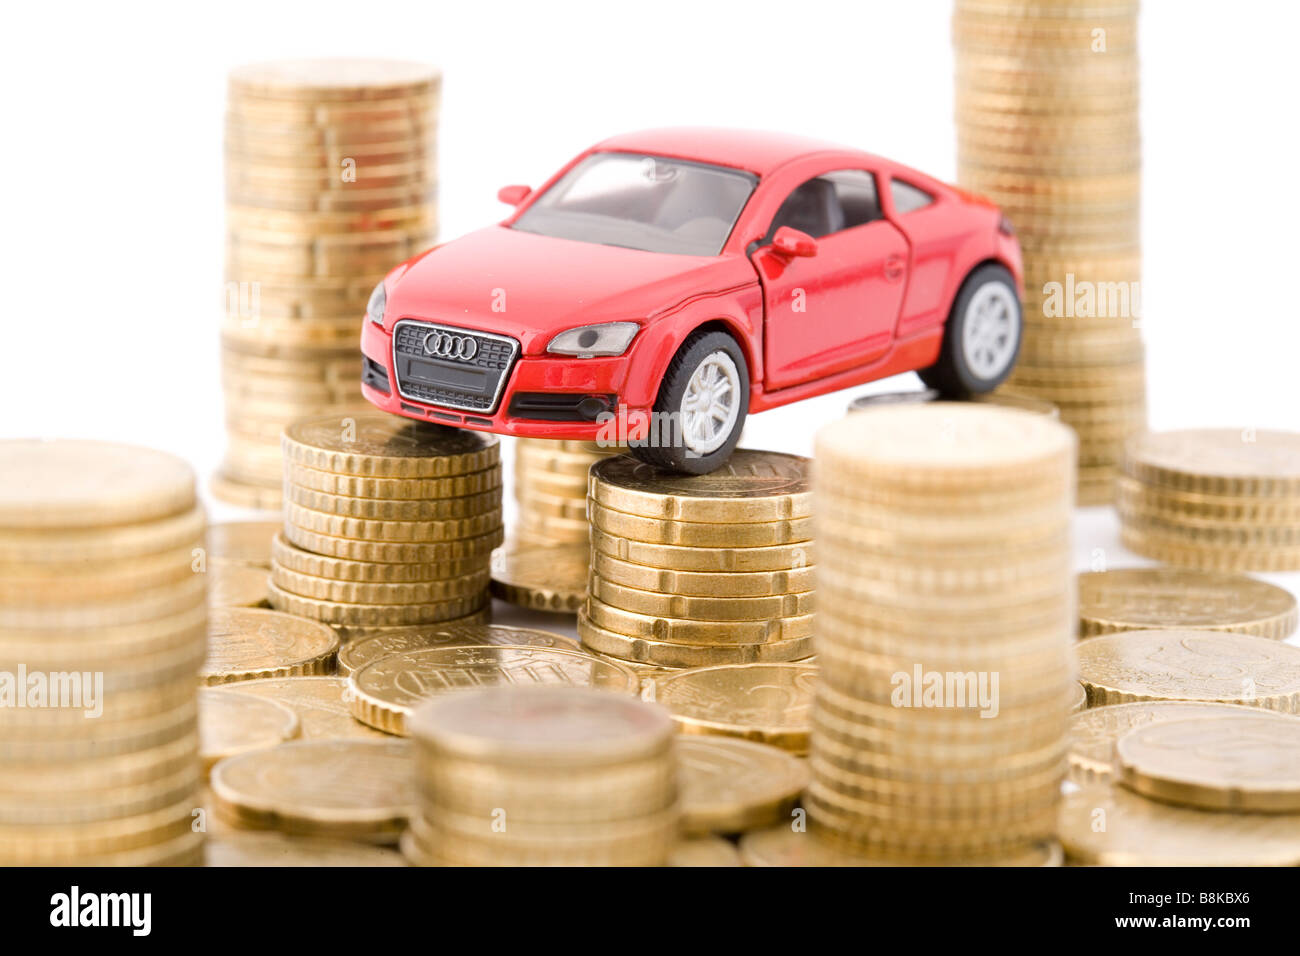 Model car with coins Stock Photo